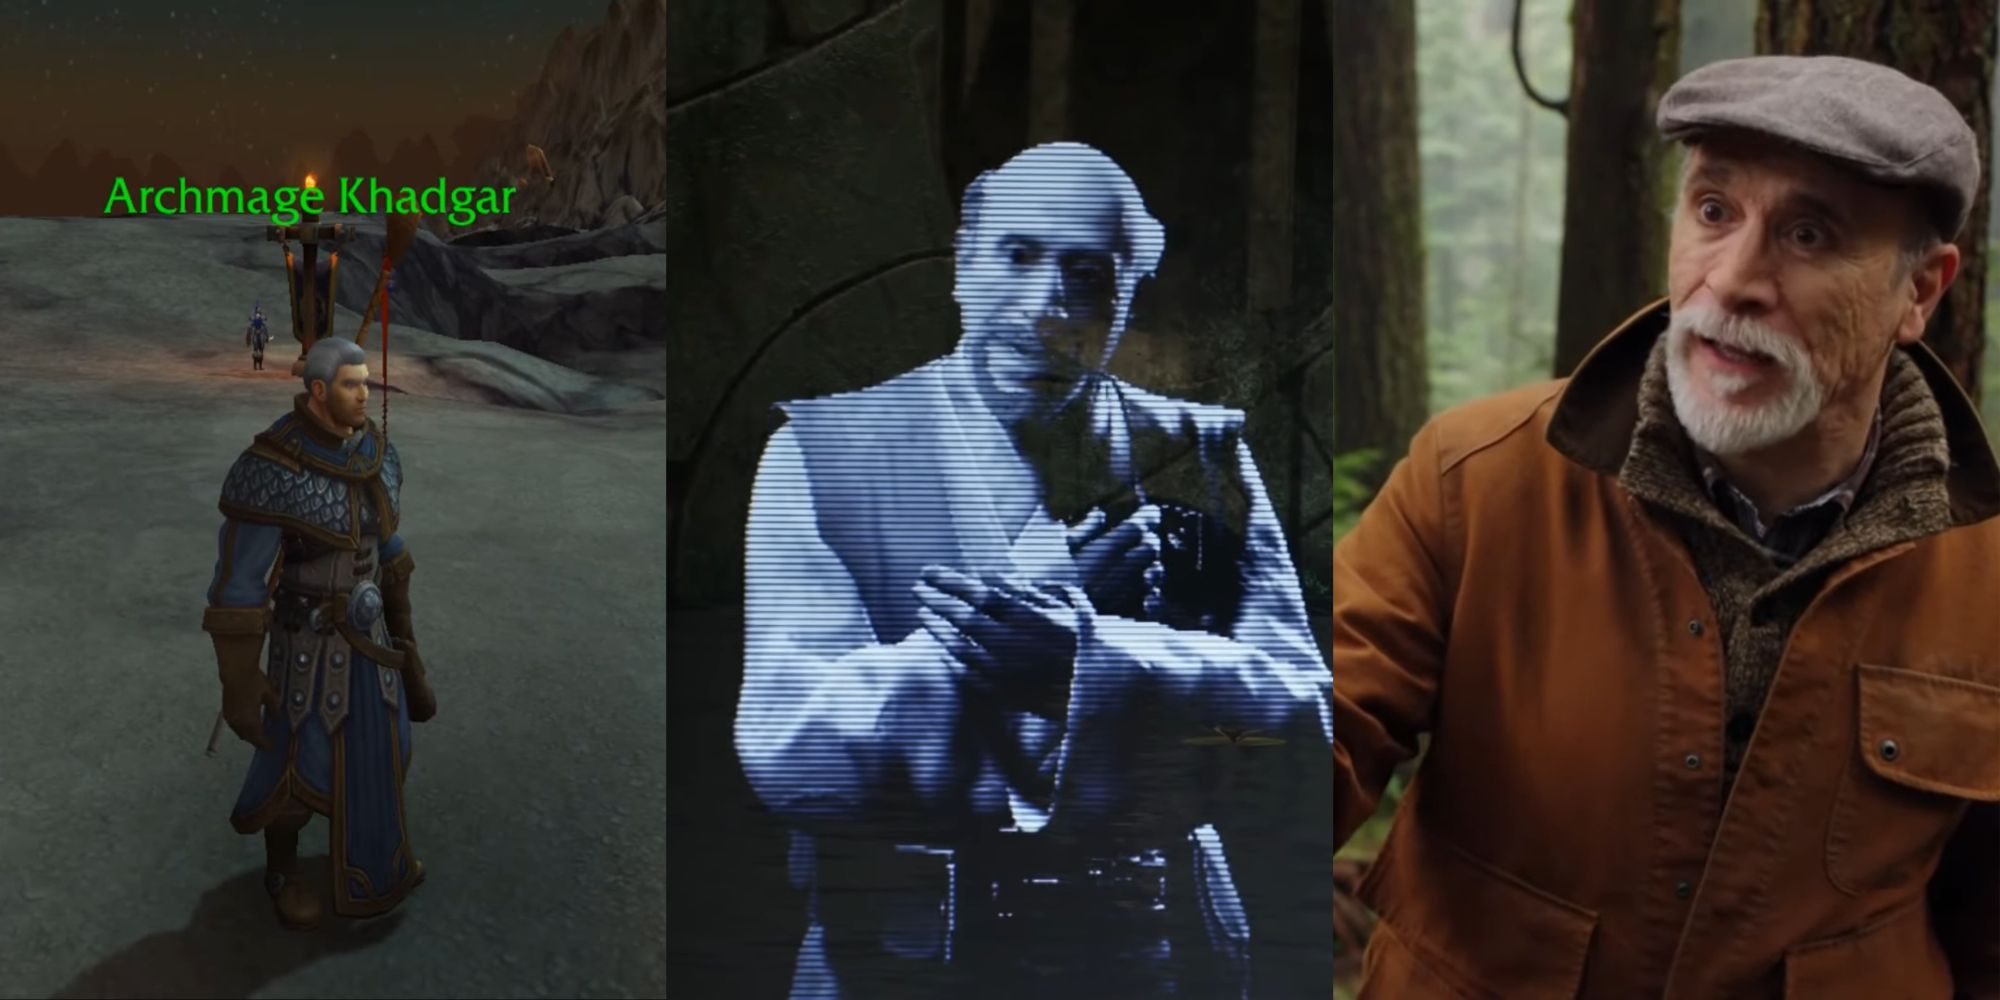 Split image collage of Tony Amendola's Warcraft character Archmage Khadgar, Eno Cordova speaking to Cal Kestis, and Marco/Geppetto in the woods in Once Upon a Time.